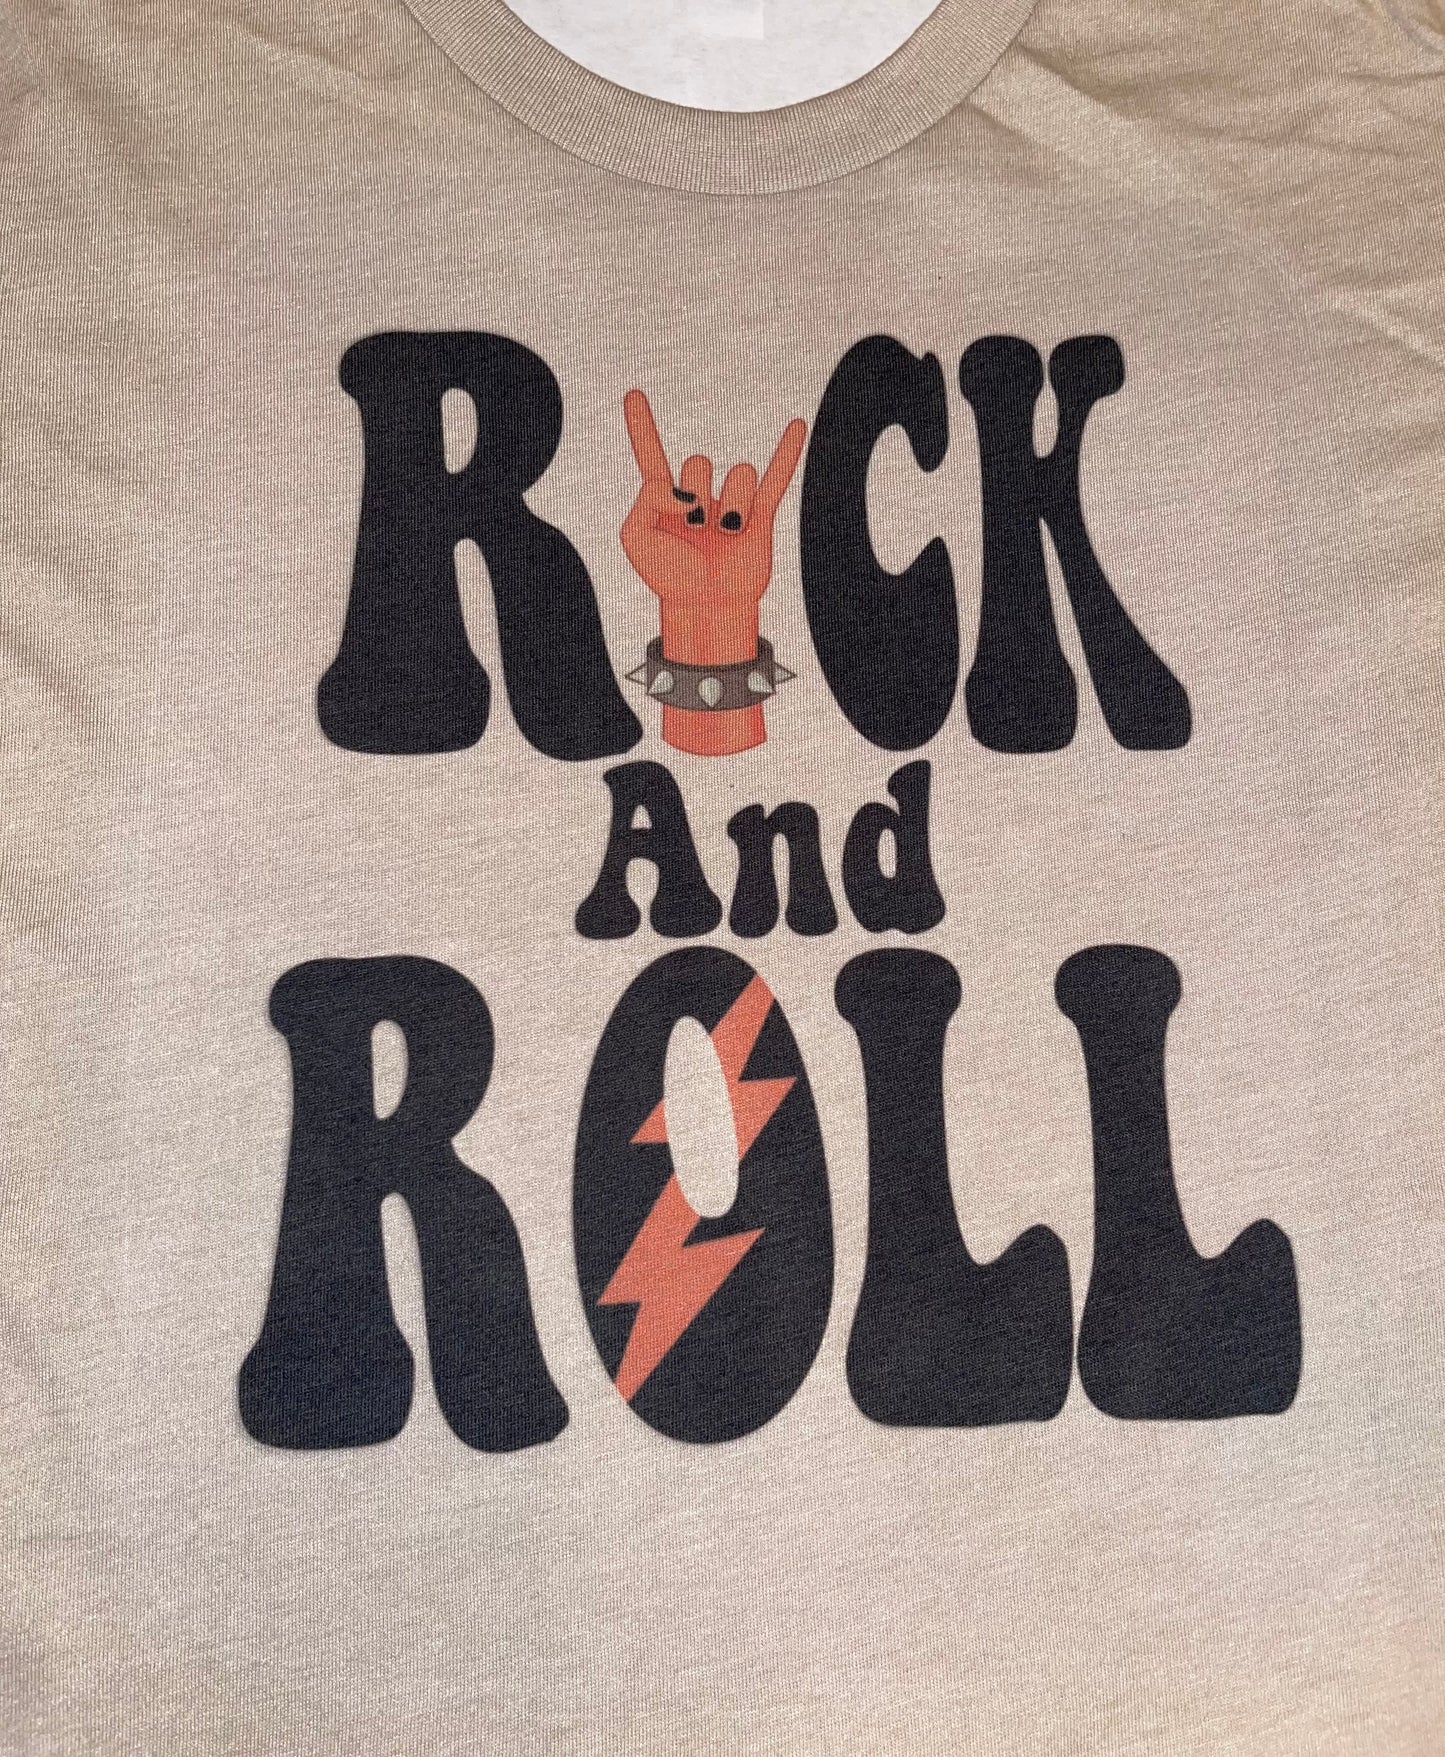 Rock and Roll Tee